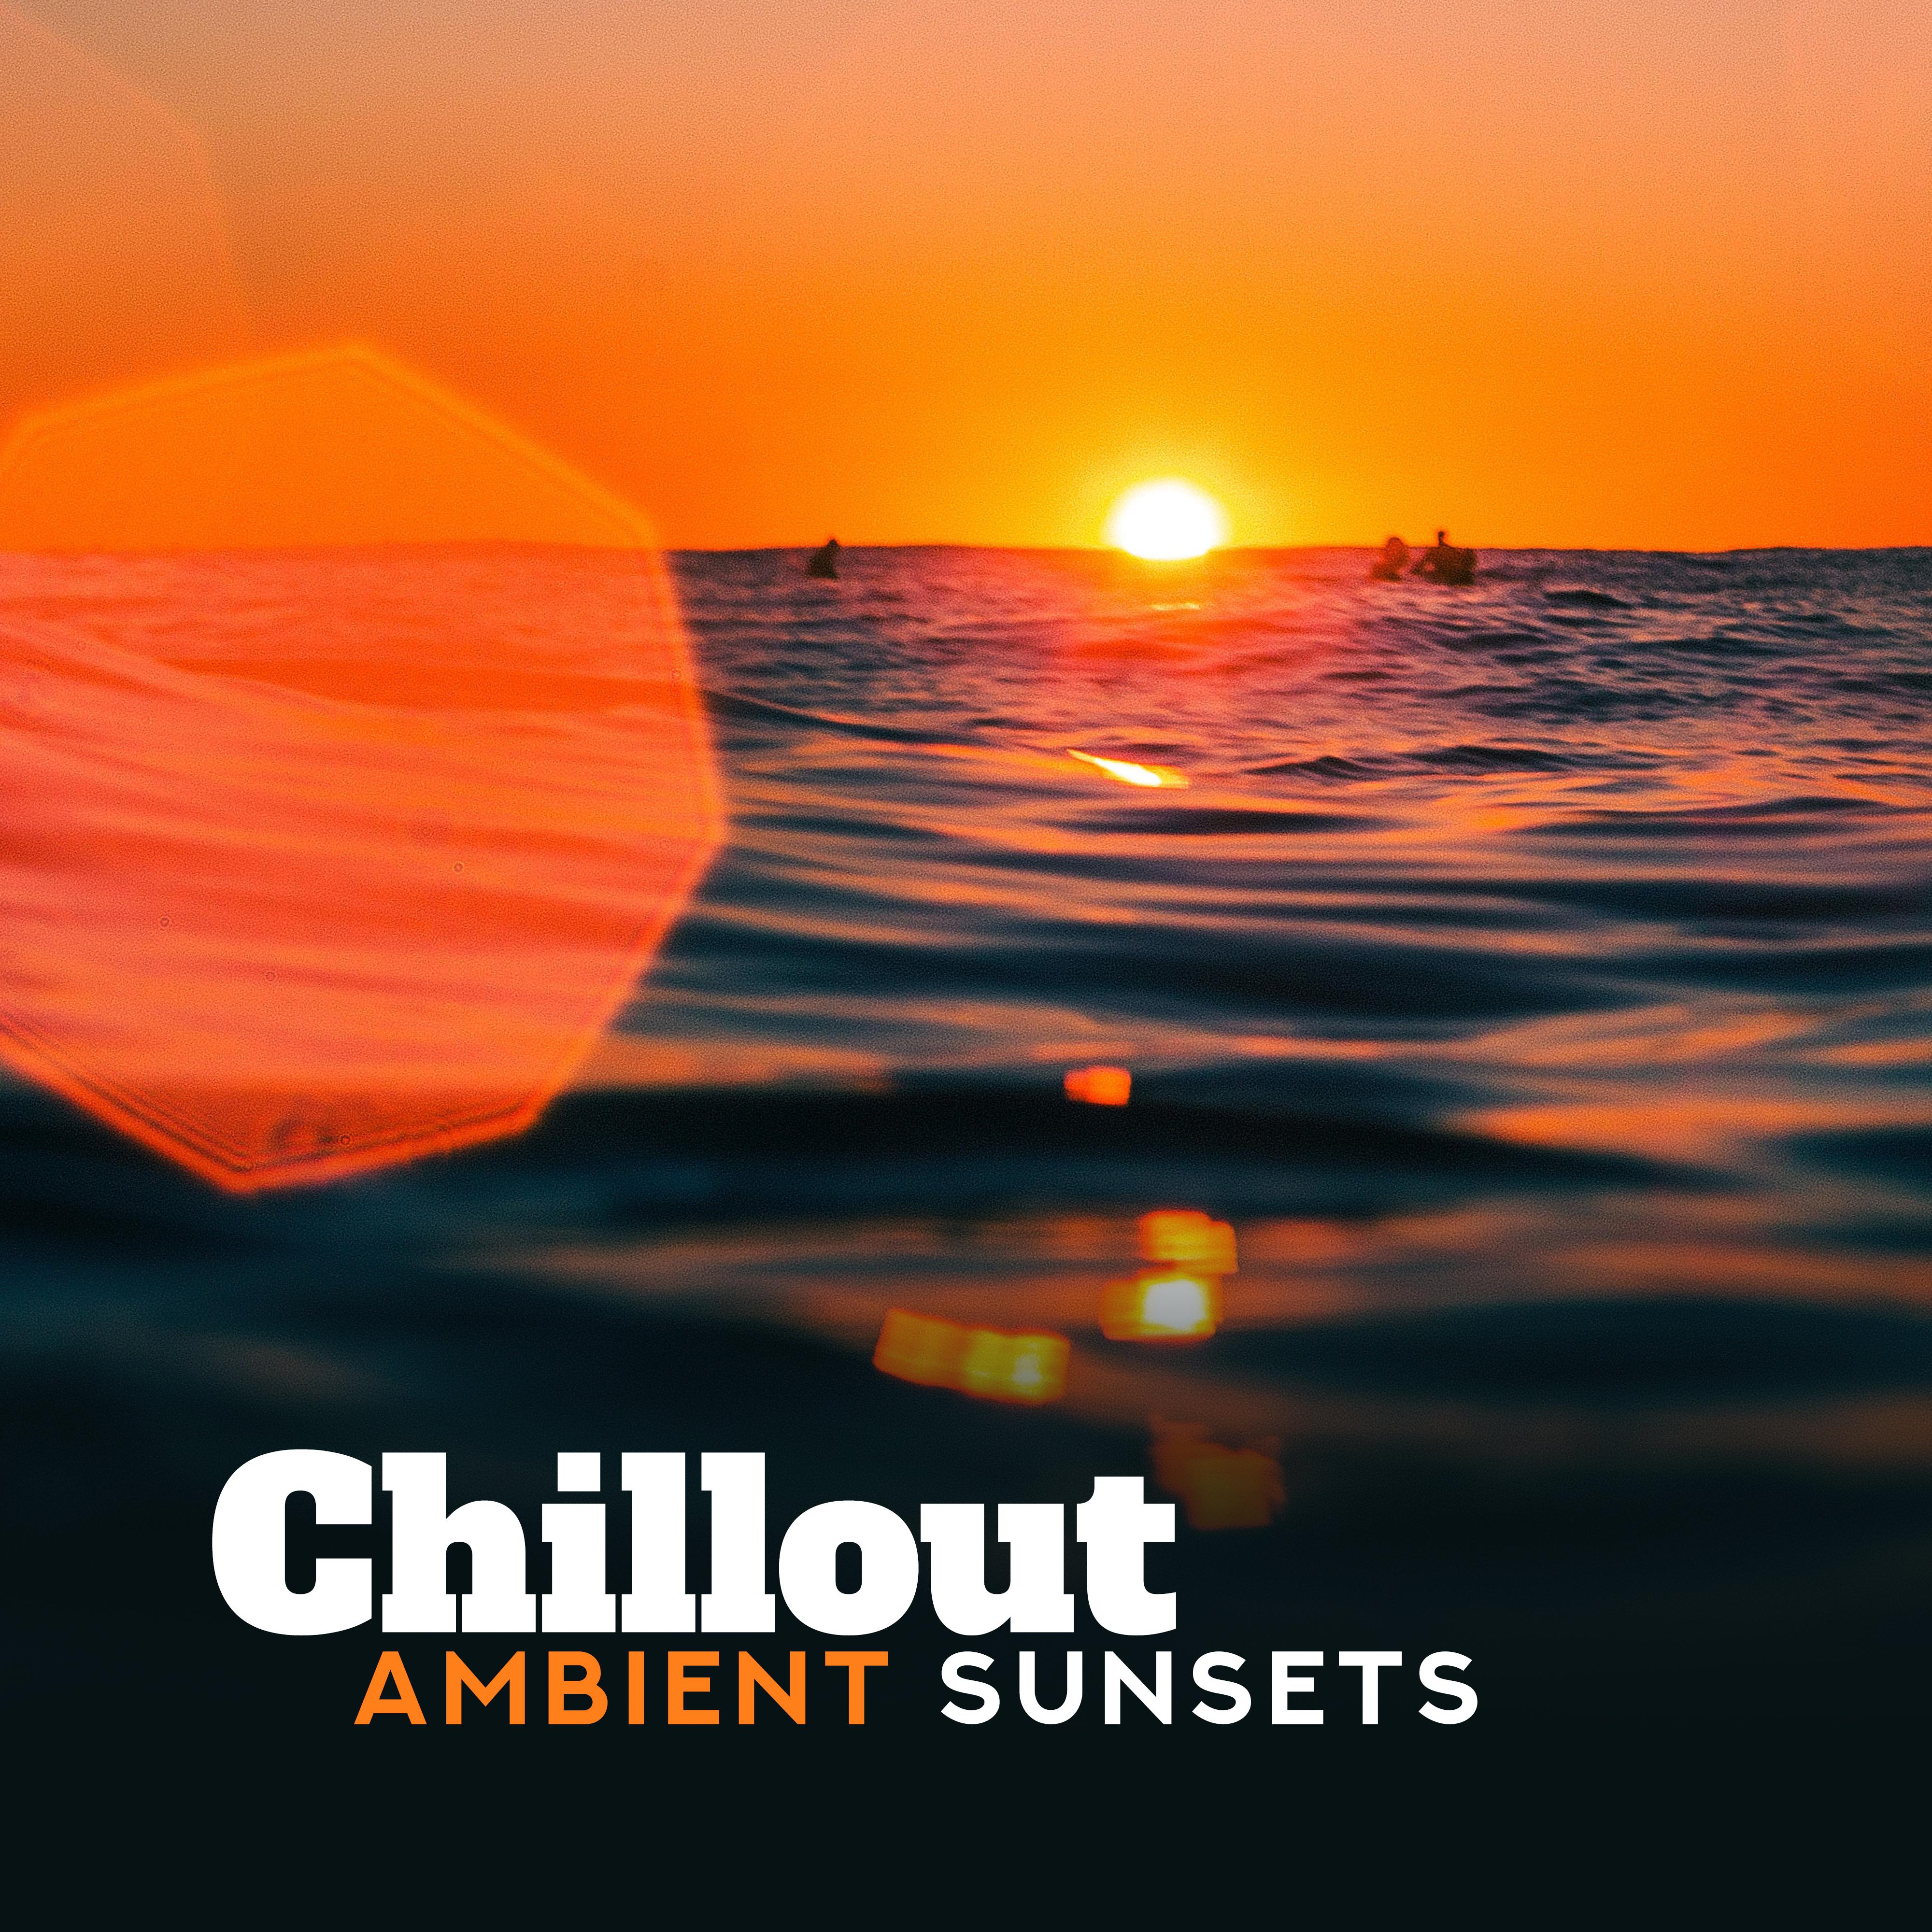 Chillout Ambient Sunsets: 2019 Chill Out Music Compilation, Best Slow Beats & Beautiful Melodies for Total Relax, Sun Salutation, Deep Lounge Vibes, Perfect Vacation Calm & Rest